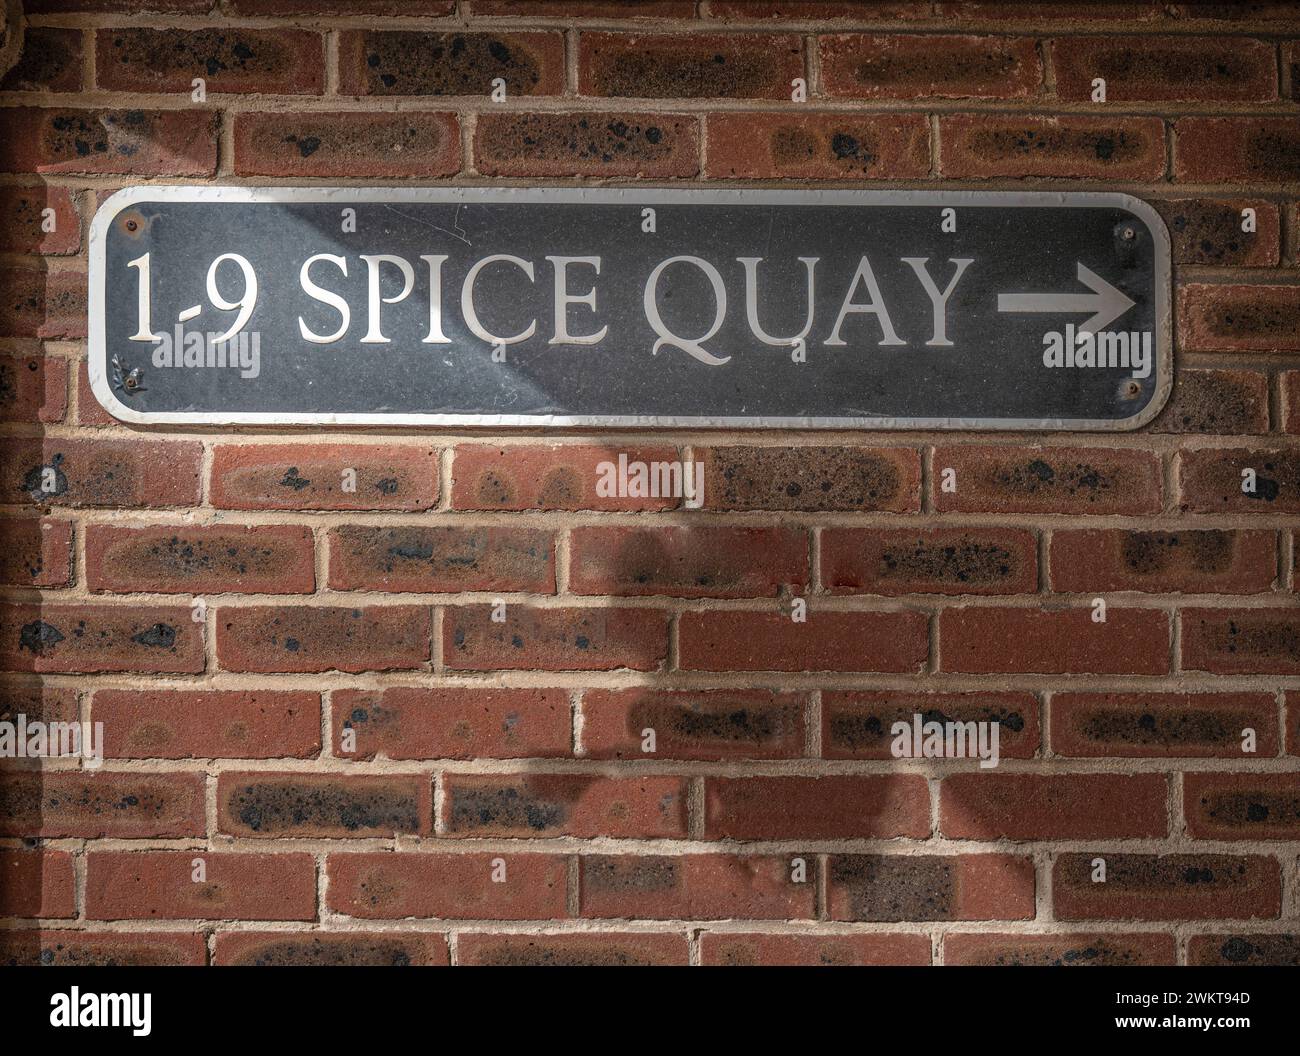 Sign on brick wall indicating direction to Spice Quay, Old Portsmouth, UK. Stock Photo